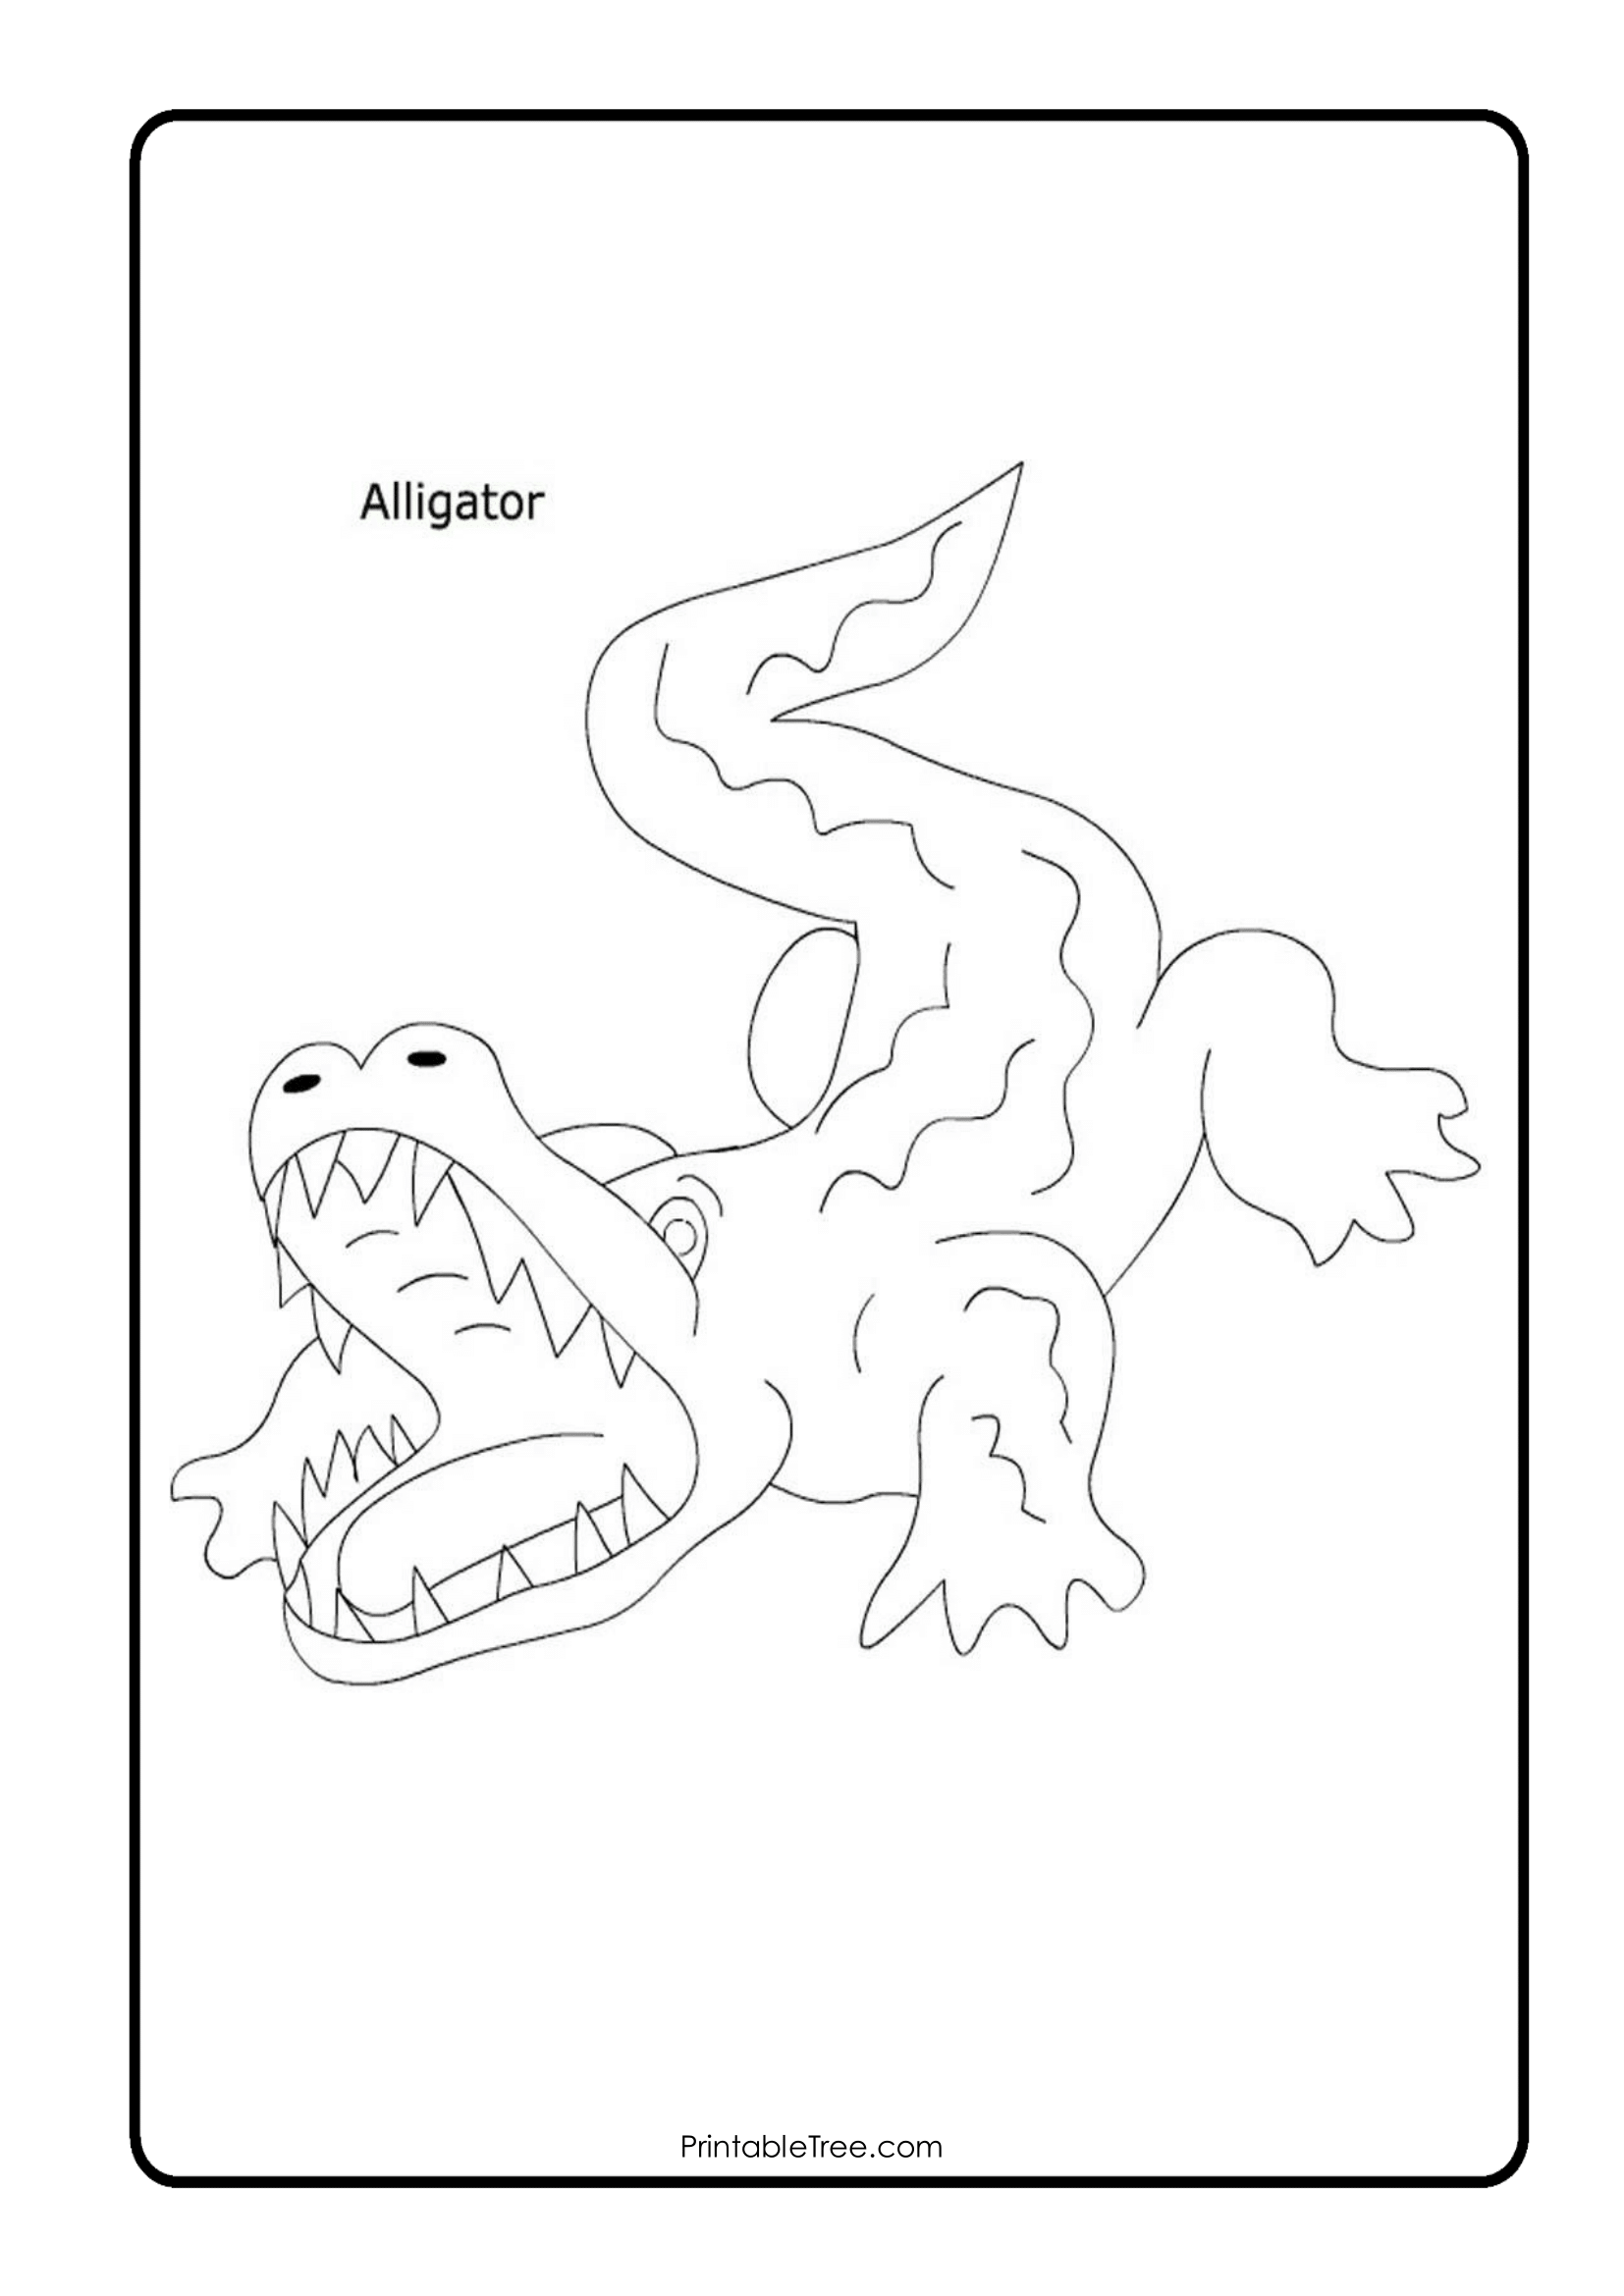 Alligator Coloring Page for Kids Graphic by Md. Salim Ahmod · Creative  Fabrica